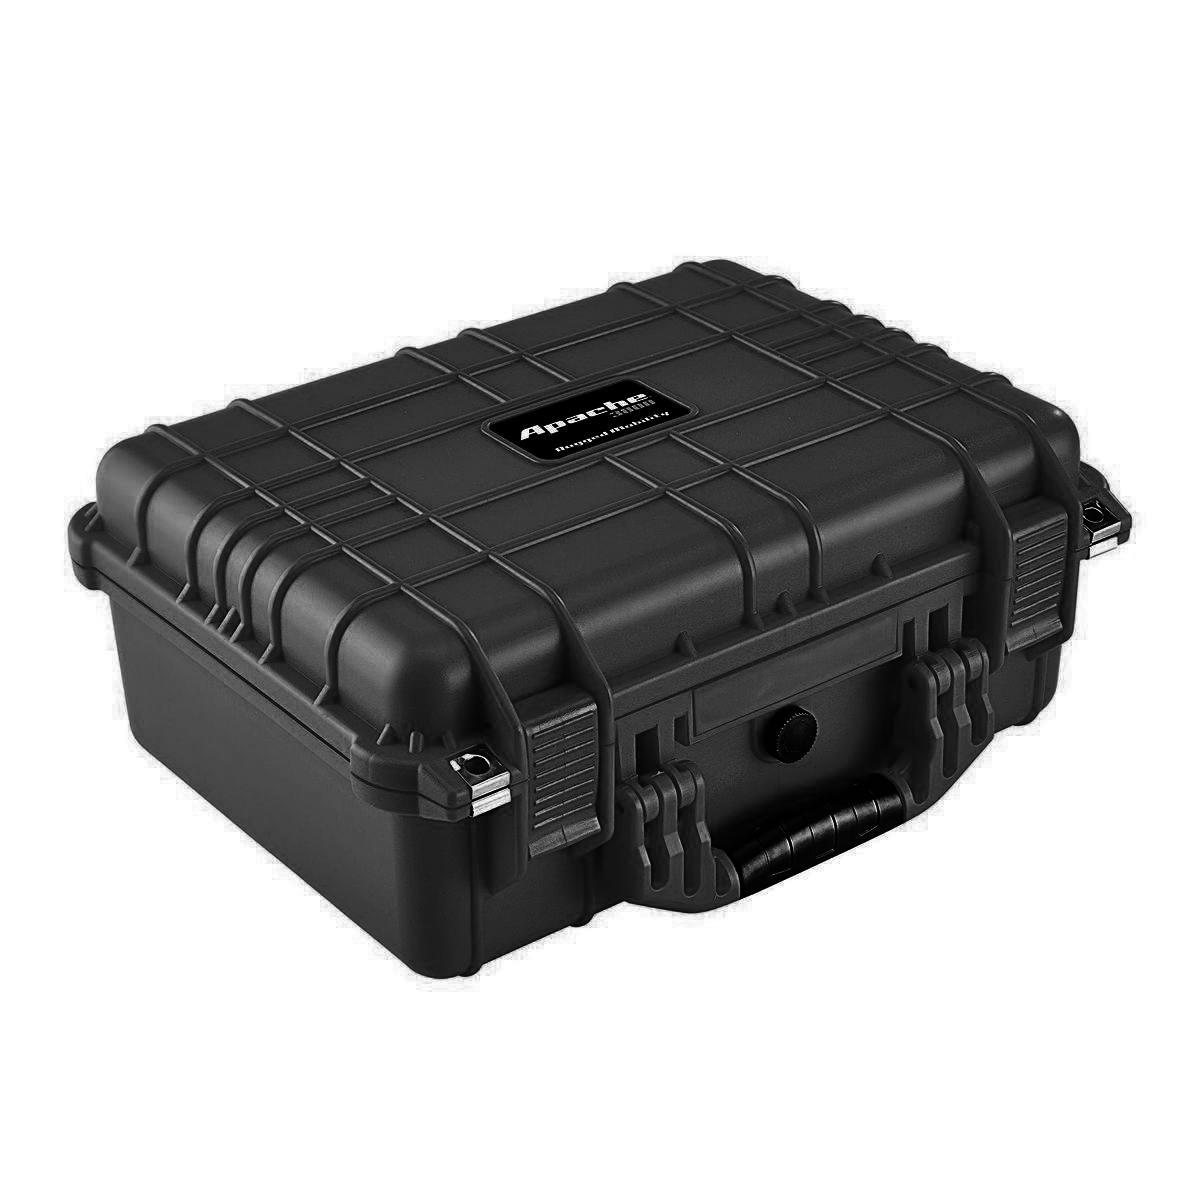 Black Apache 3800 Weatherproof Protective Case, X-Large, Watertight, dust-tight, impact resistant protective case - Click Image to Close